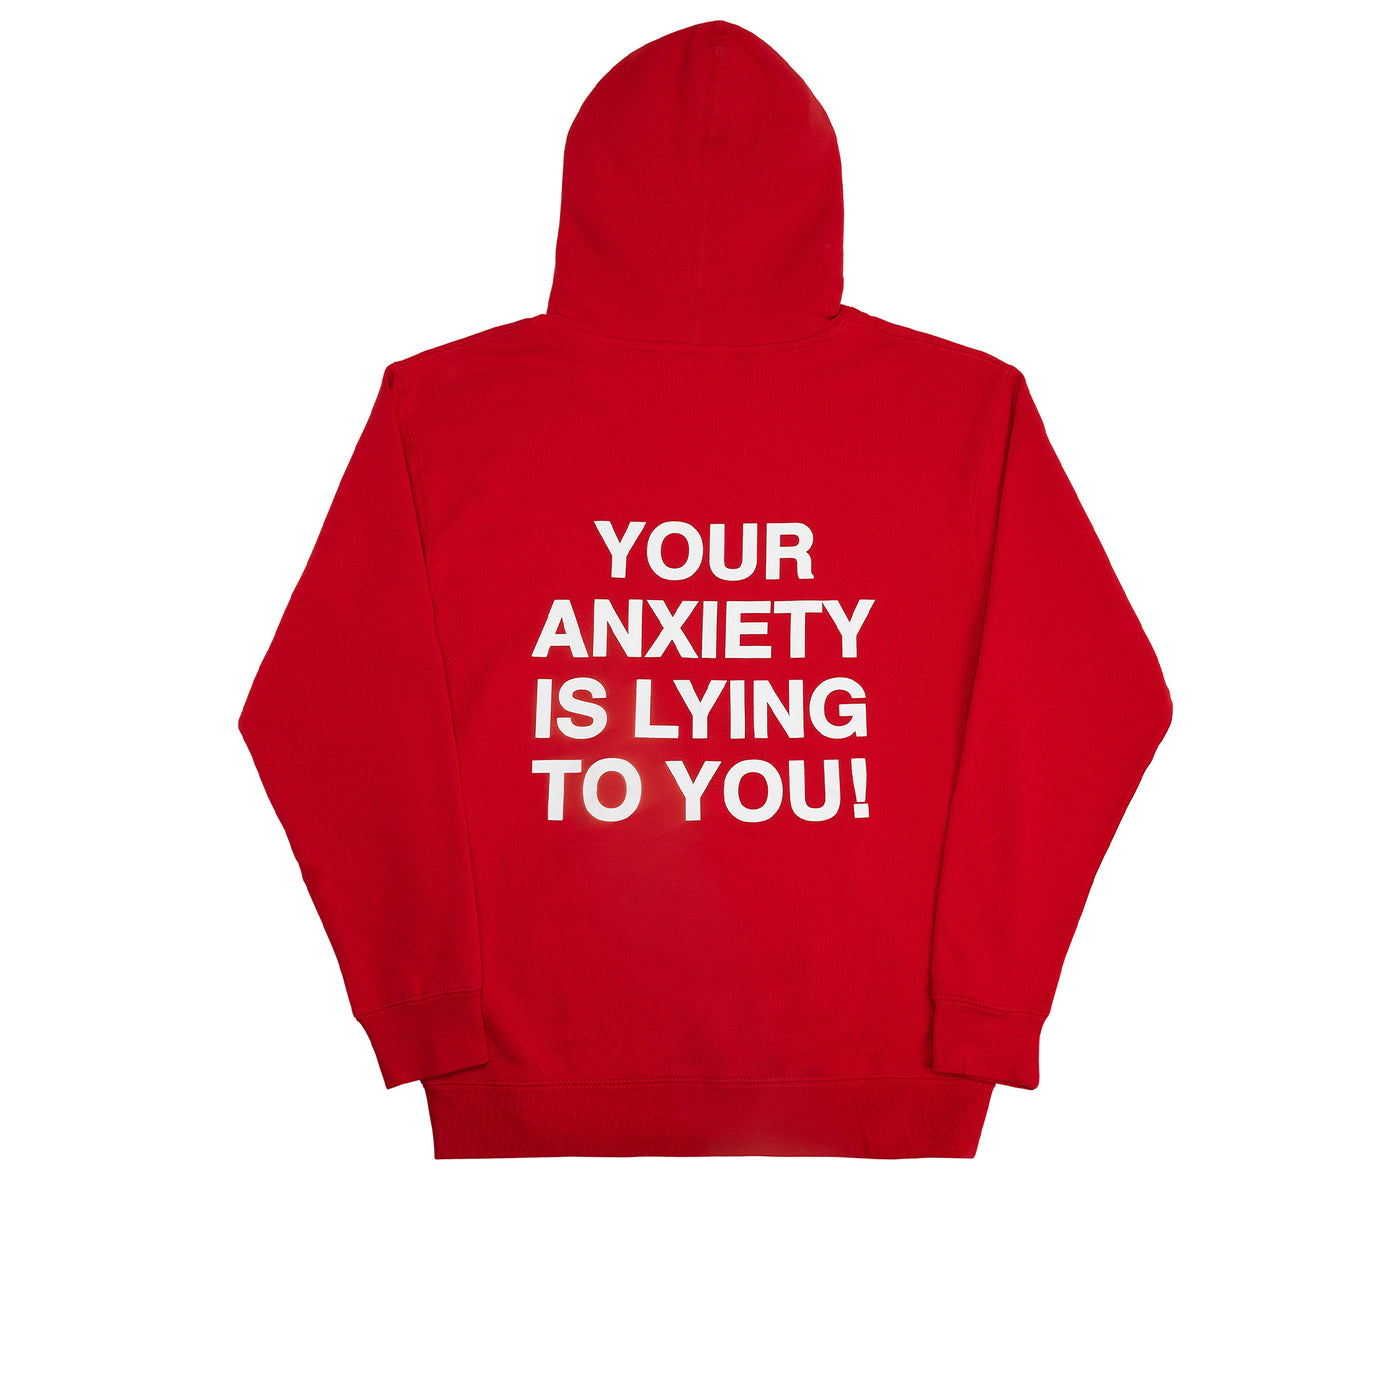 We're Not Really Strangers back view of Red hoodie saying Your Anxiety is Lying To You